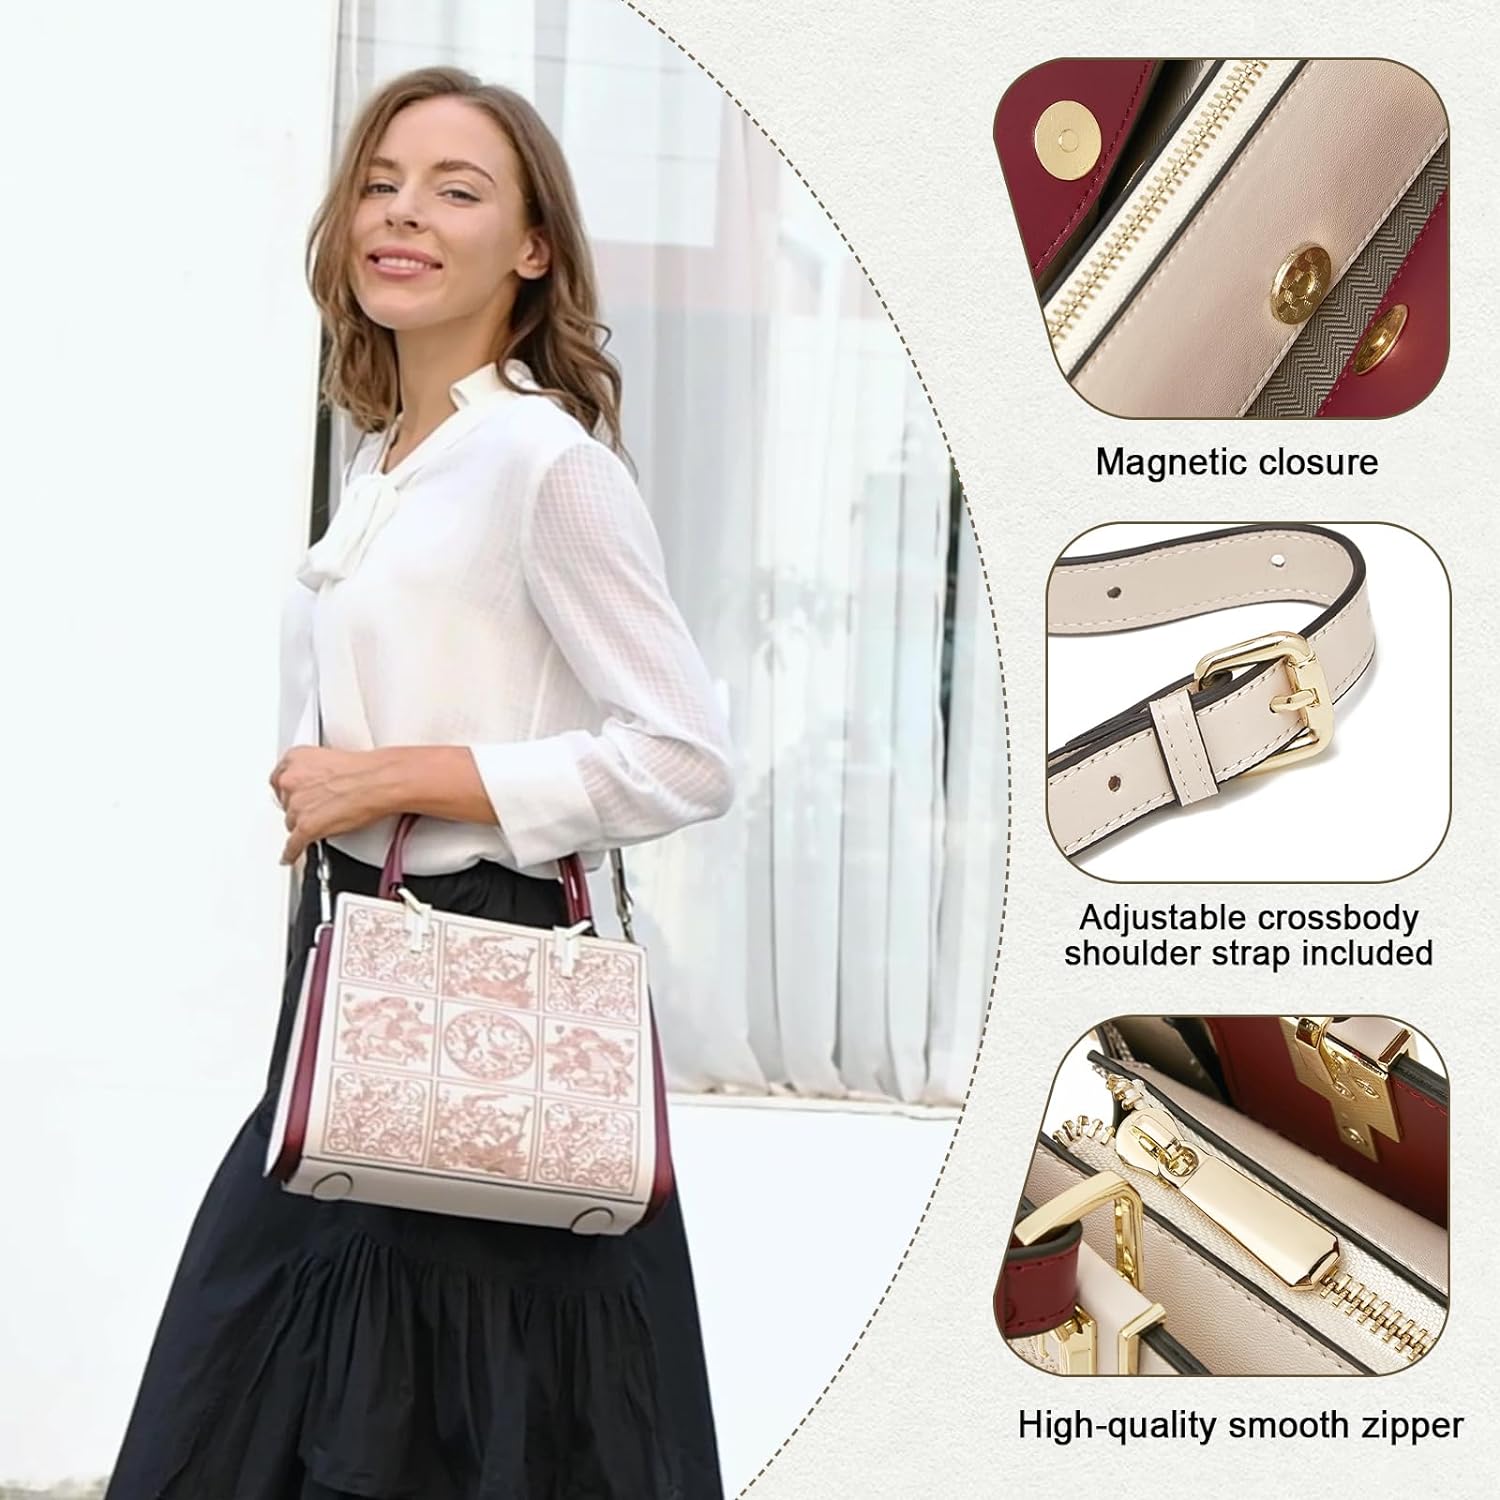 Find Your Perfect Affordable Satchel Purse & Stay Stylish on a Budget –  Shop OpenStore